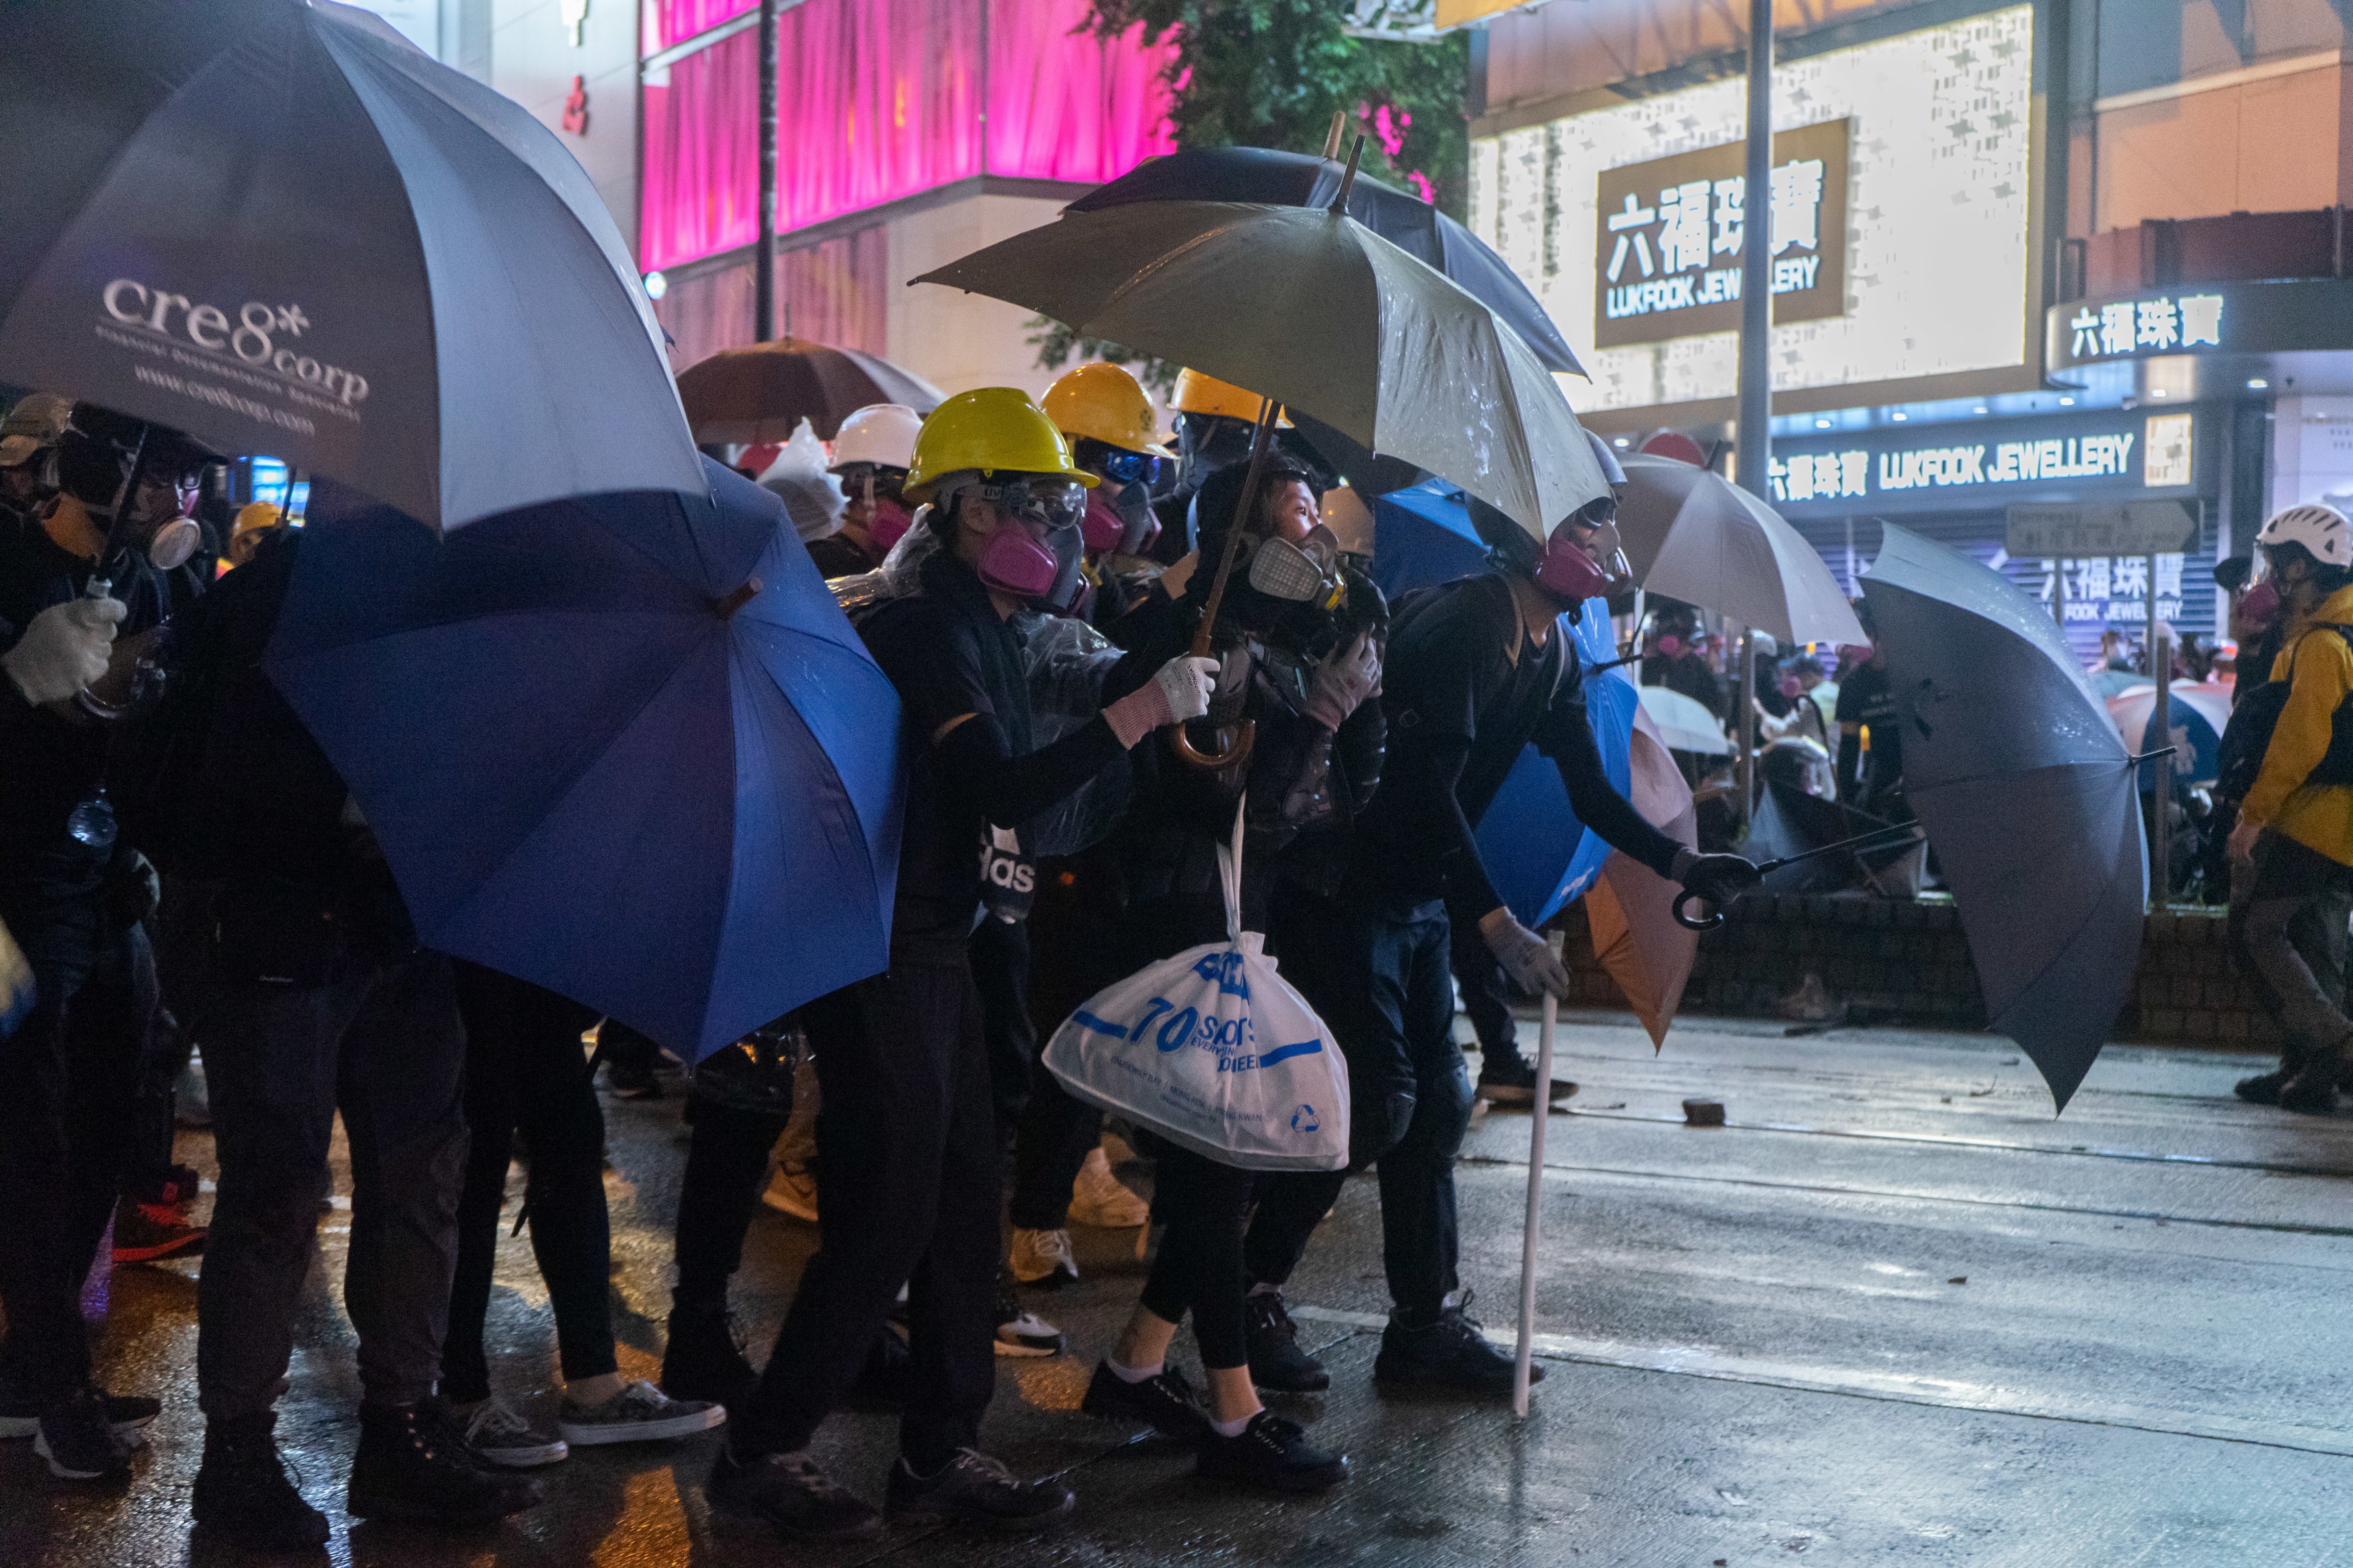 Protesters hold umbrellas to protect themselves from police attack in Hong Kong on Aug. 31, 2019. (Alda Tsang/SOPA Images/LightRocket via Getty Images)